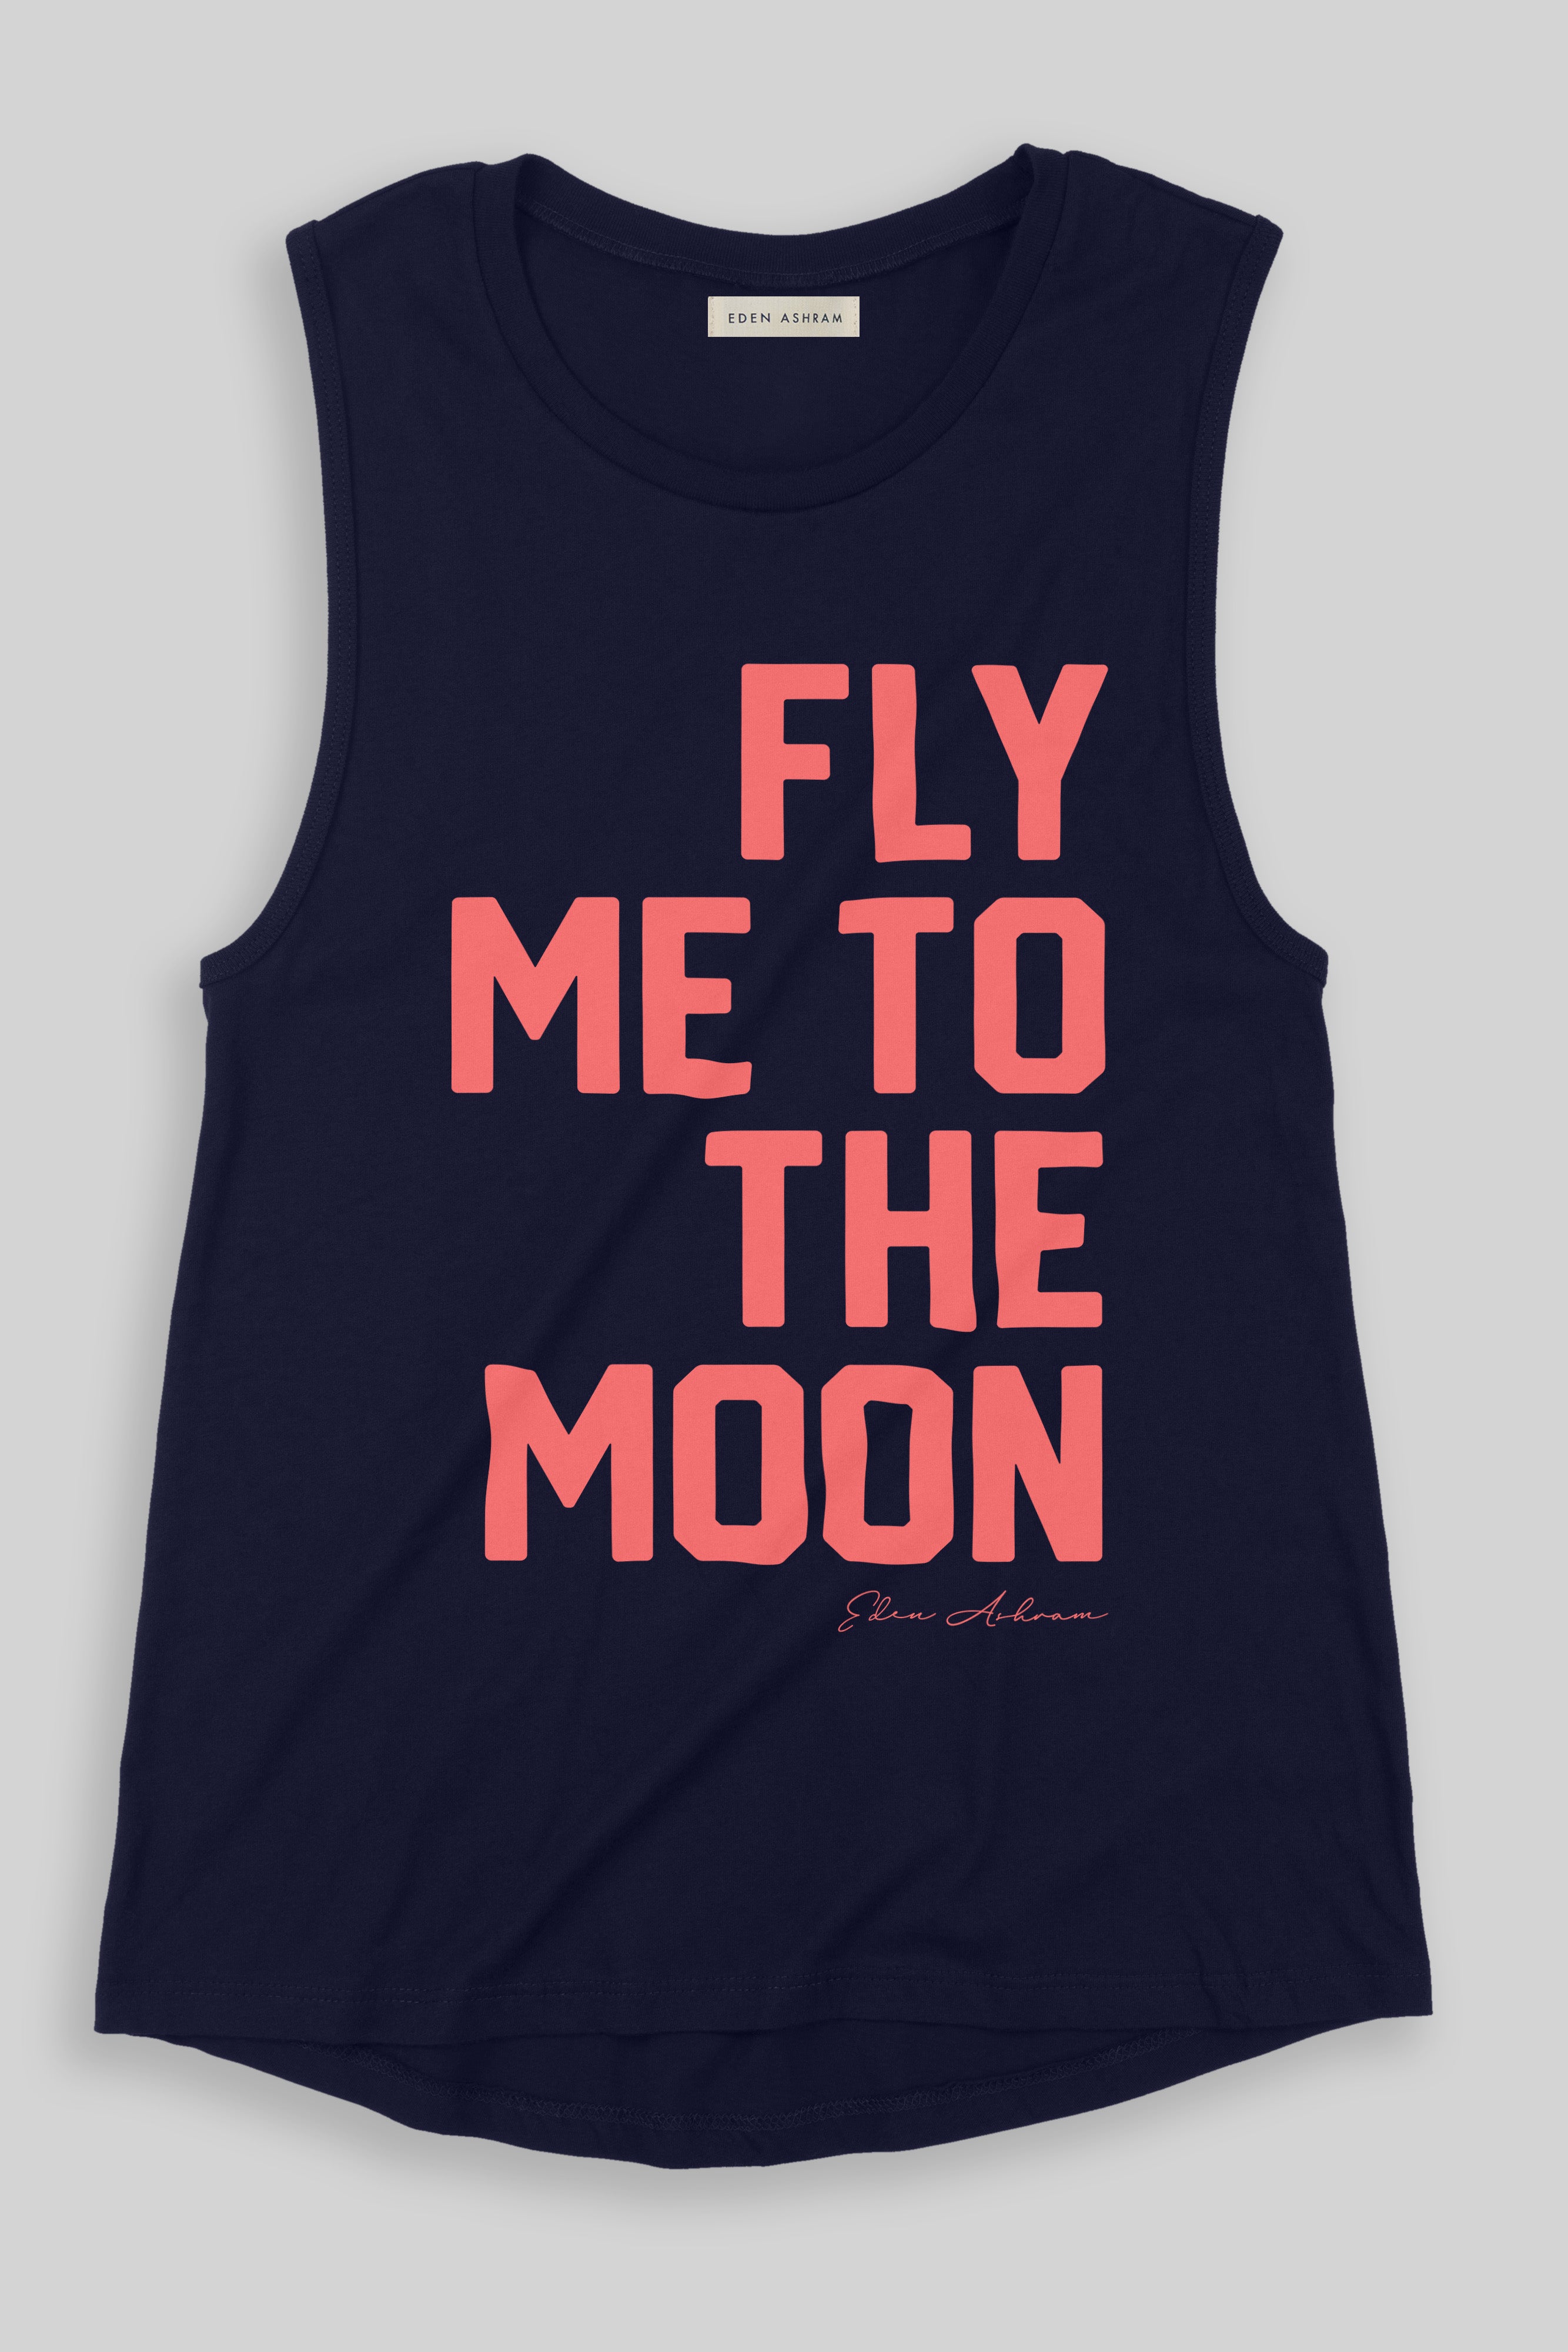 EDEN ASHRAM Fly Me To The Moon Premium Jersey Muscle Tank Navy